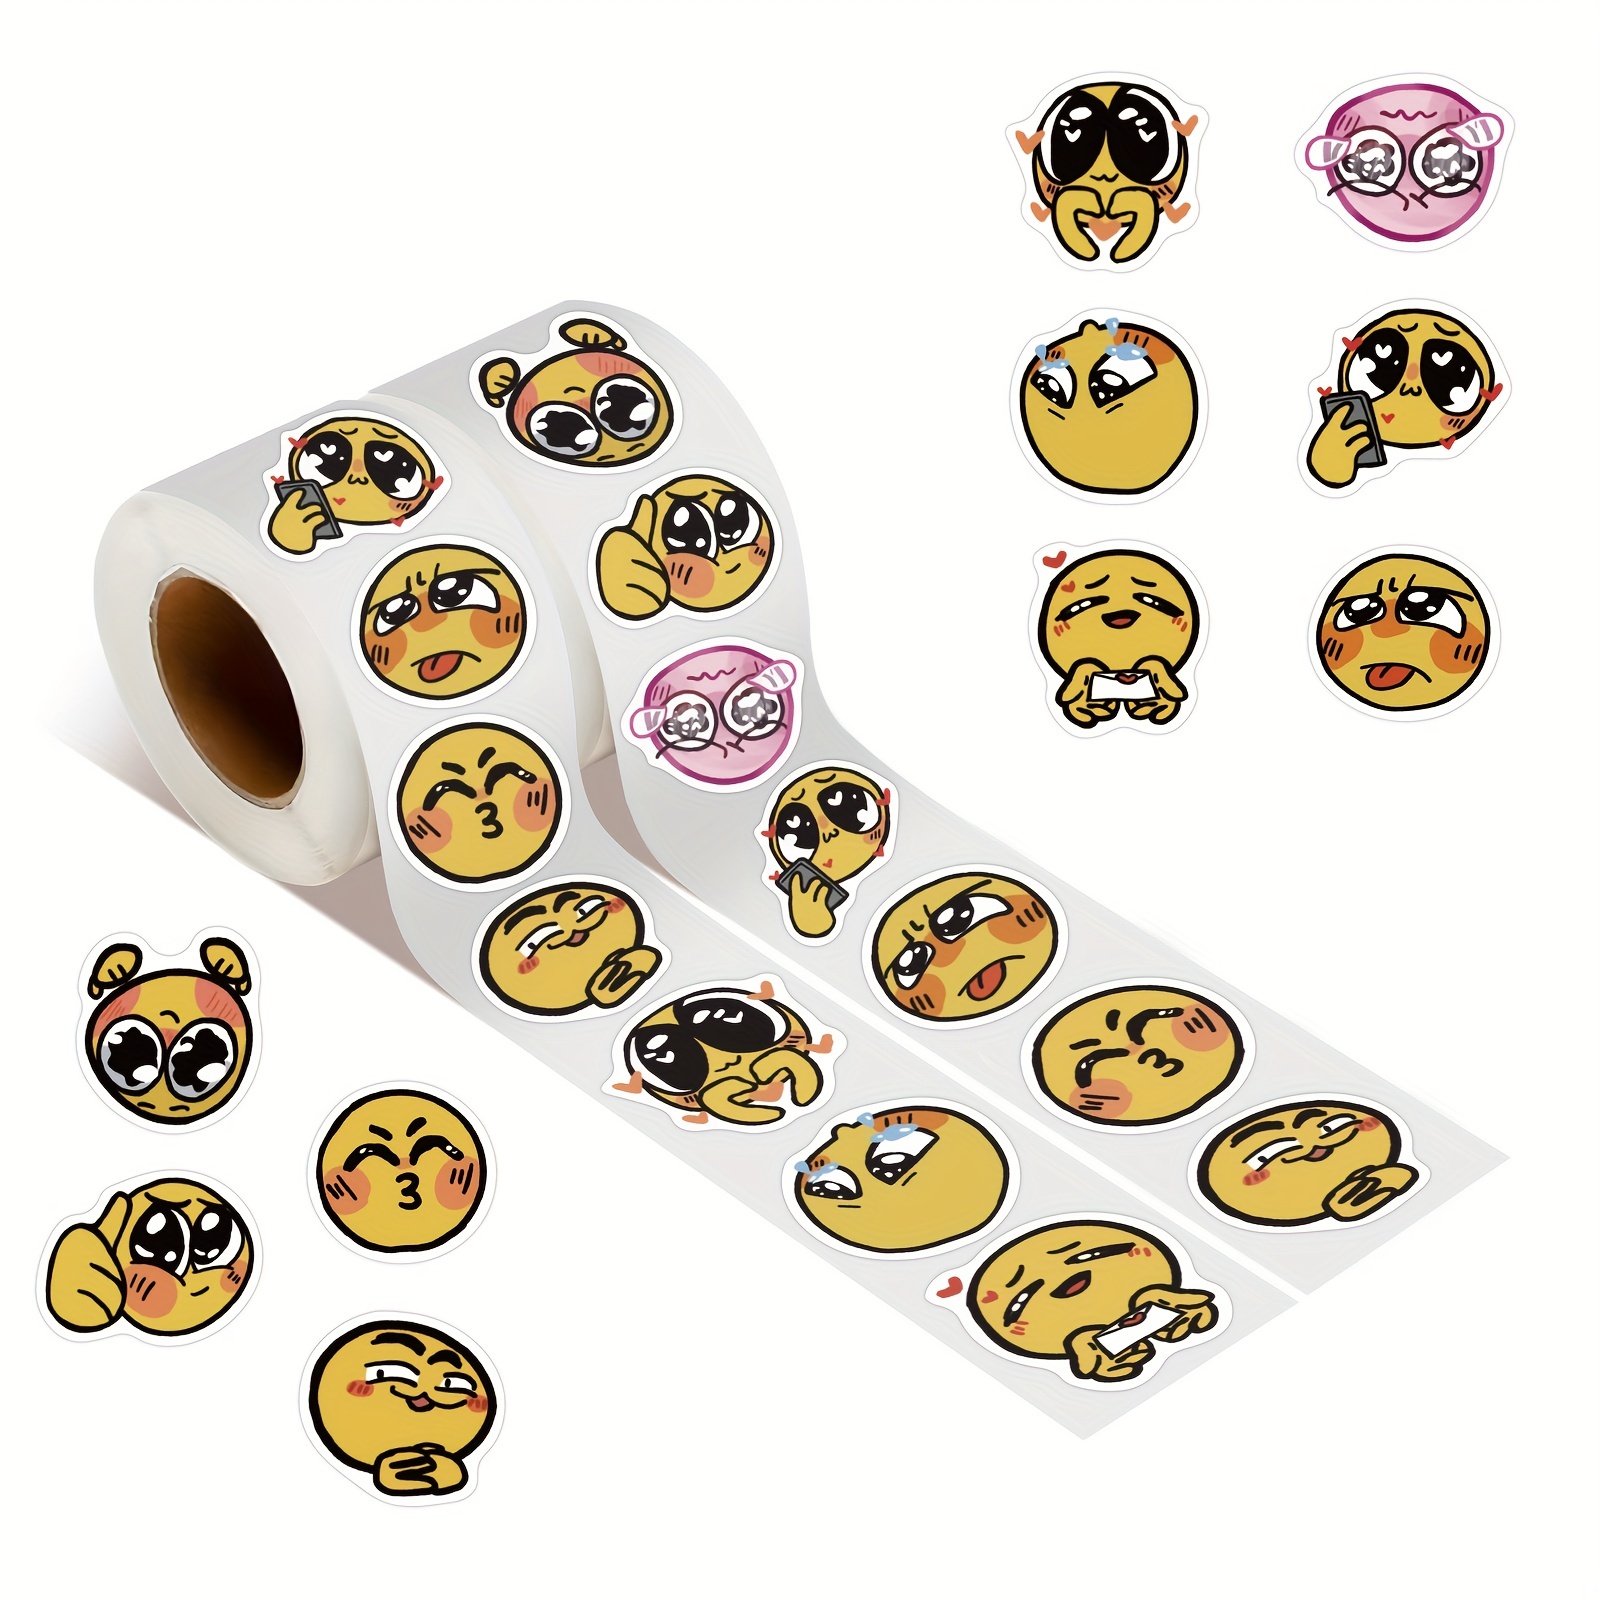 Smiley Face Stickers Paper Roll - 500Pcs Removable Stickers For